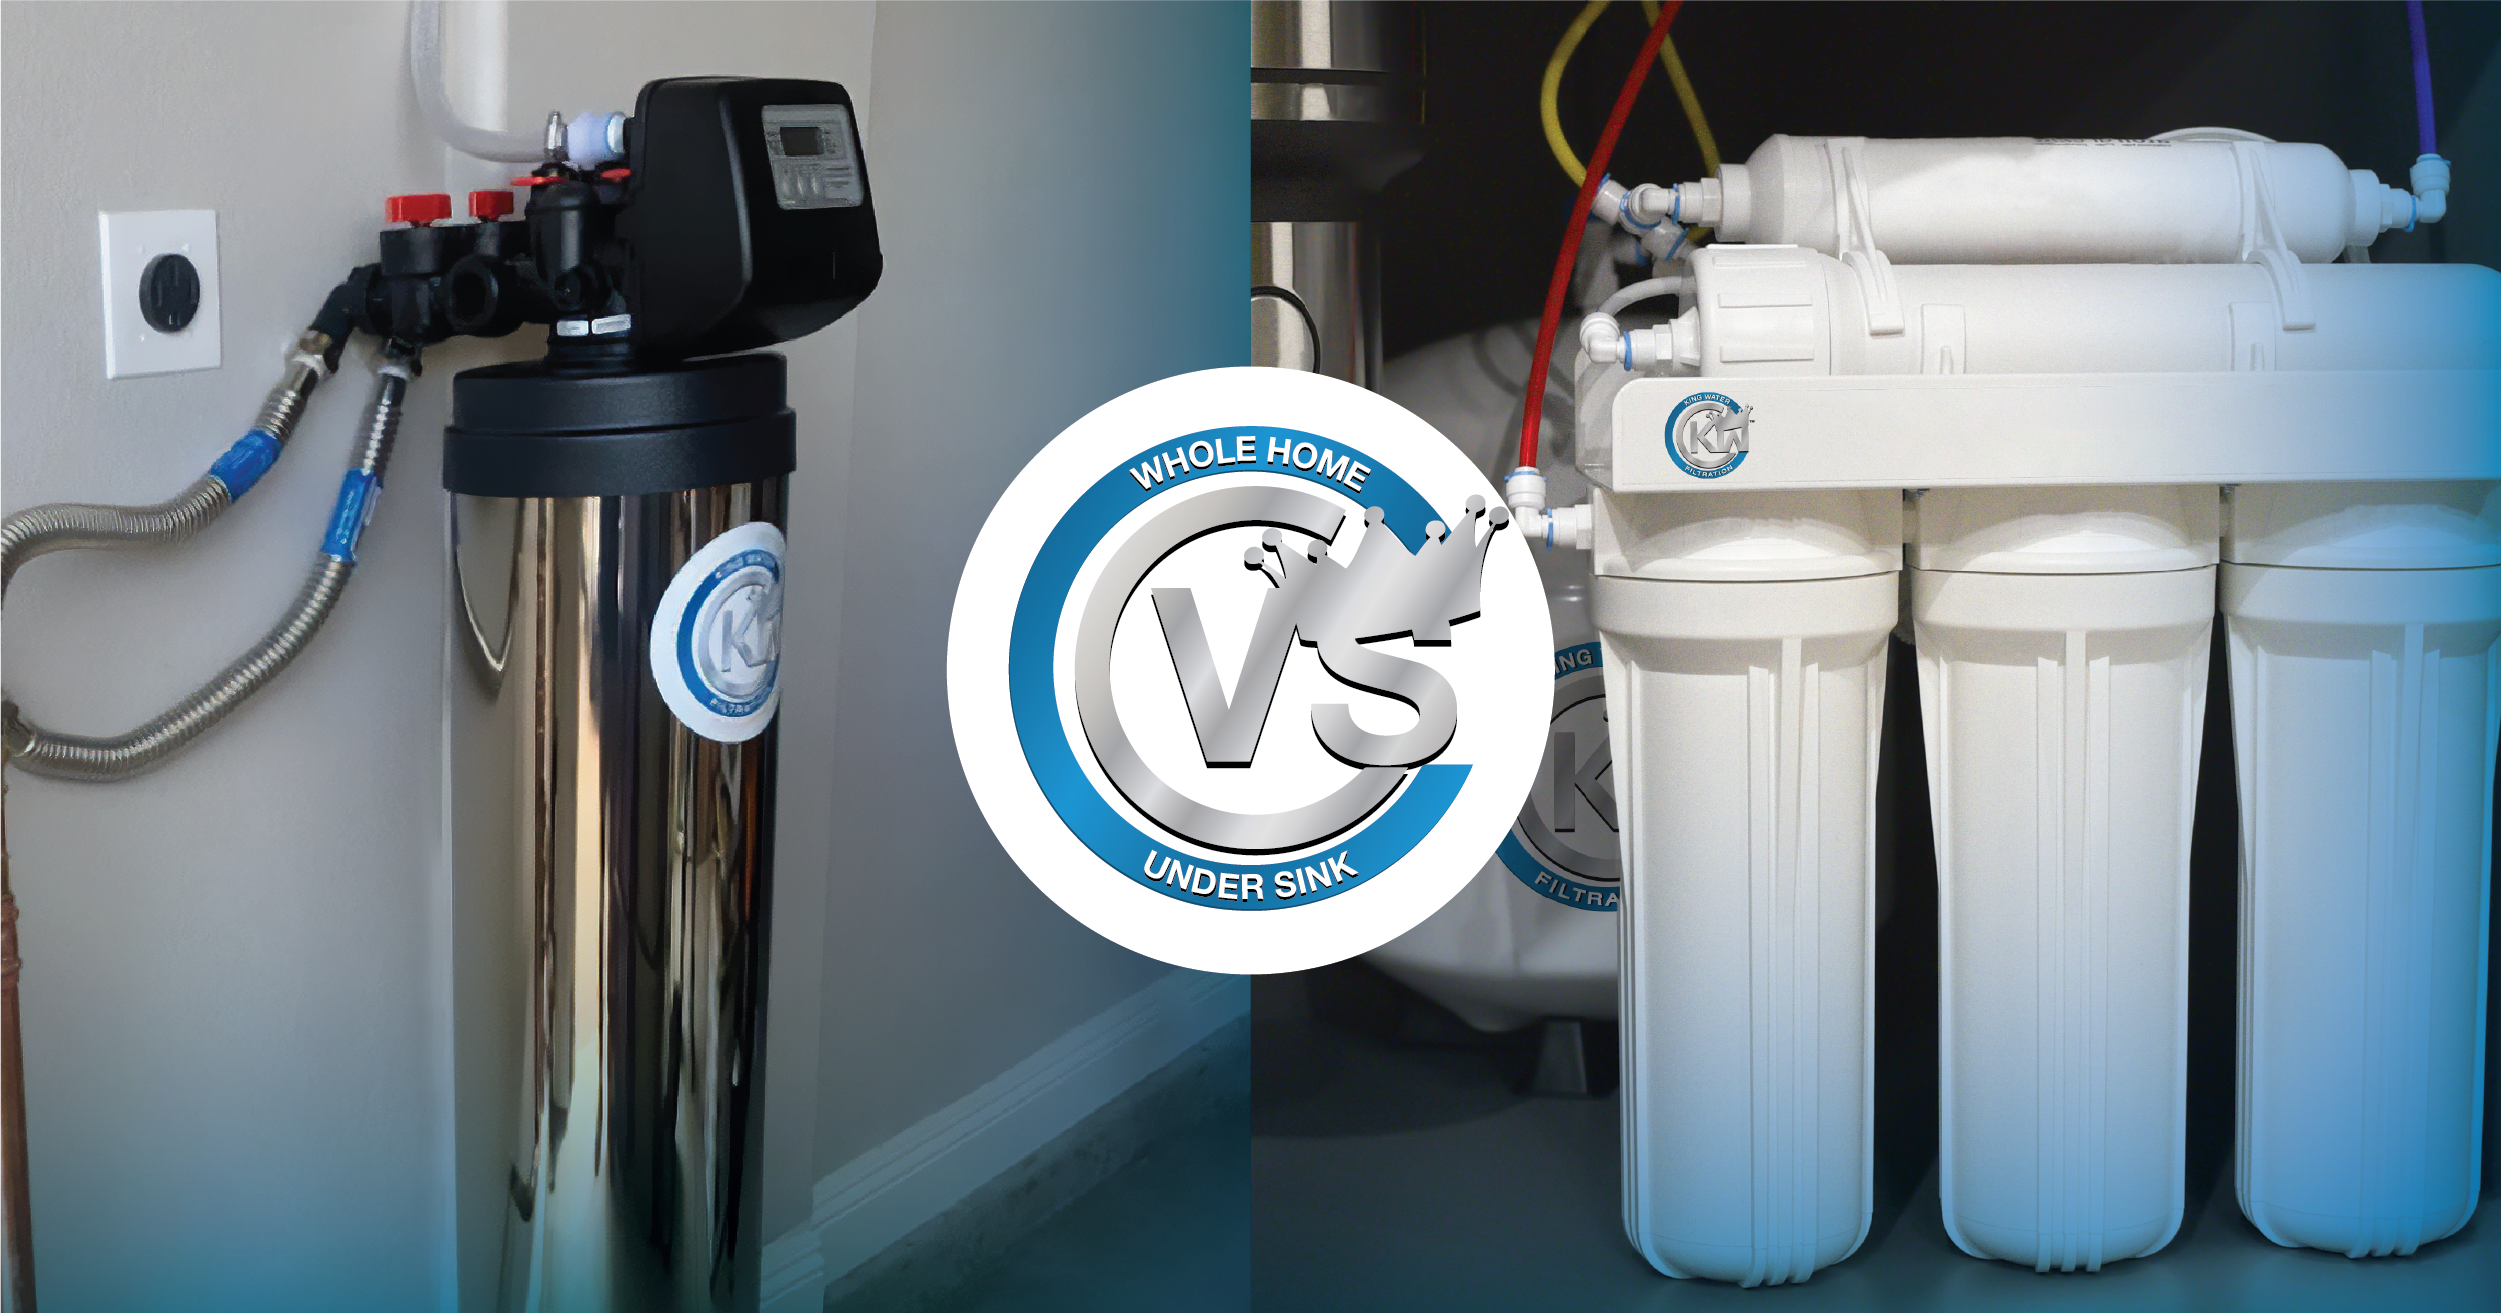 Under-Sink vs. Whole-Home Filtration: What’s Right for You?